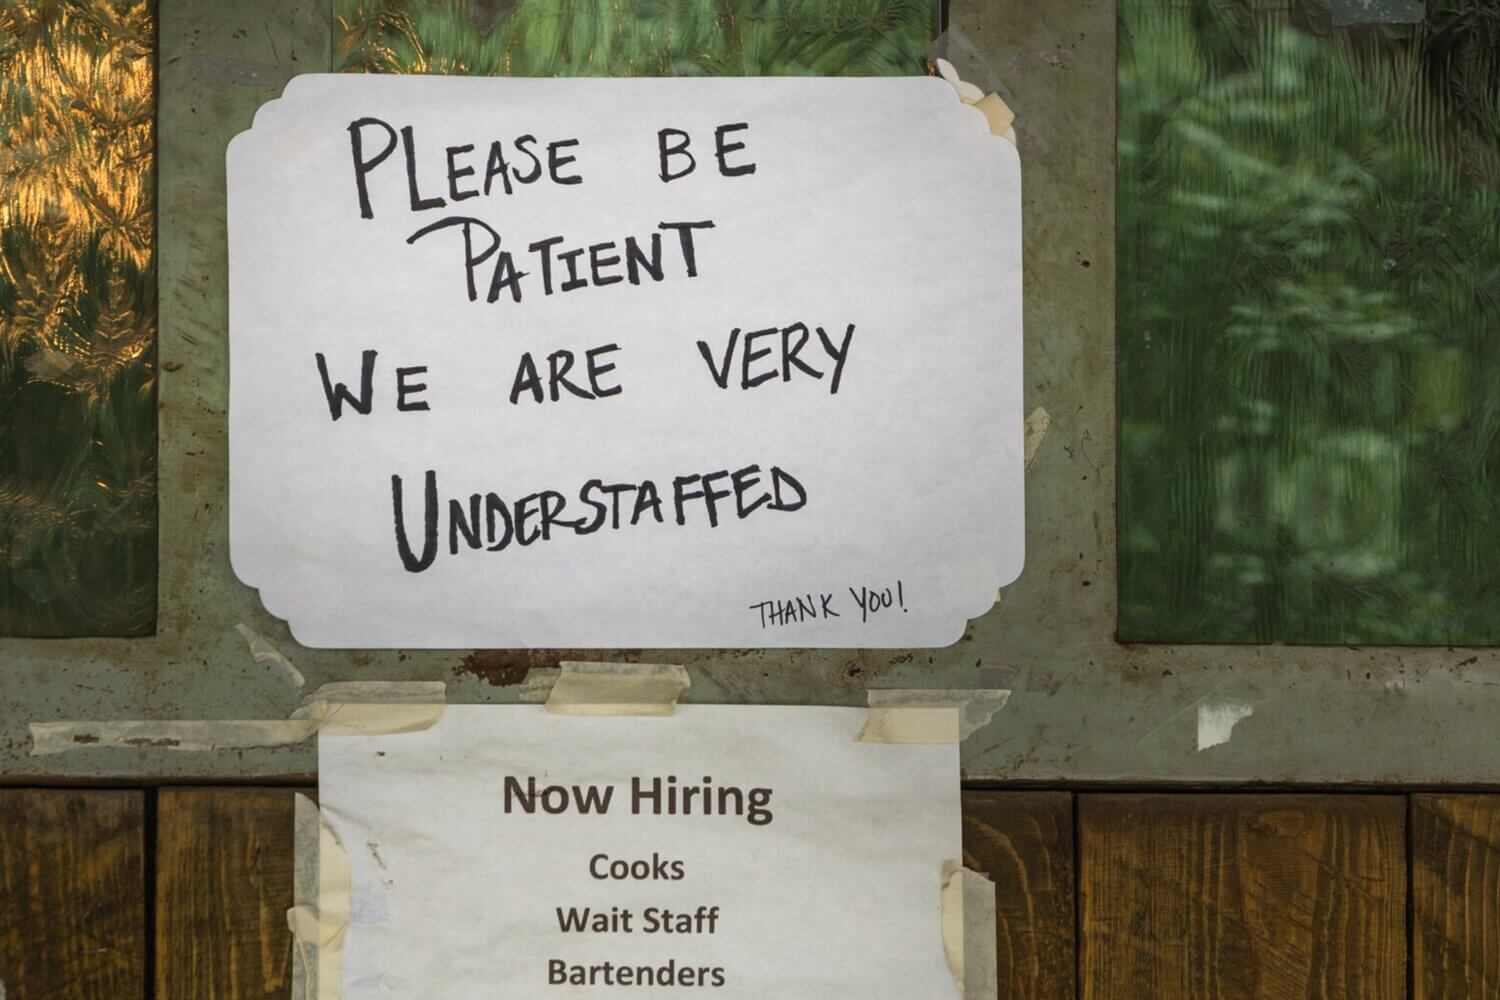 Hand-written sign saying "Please be patient we are very understaffed"